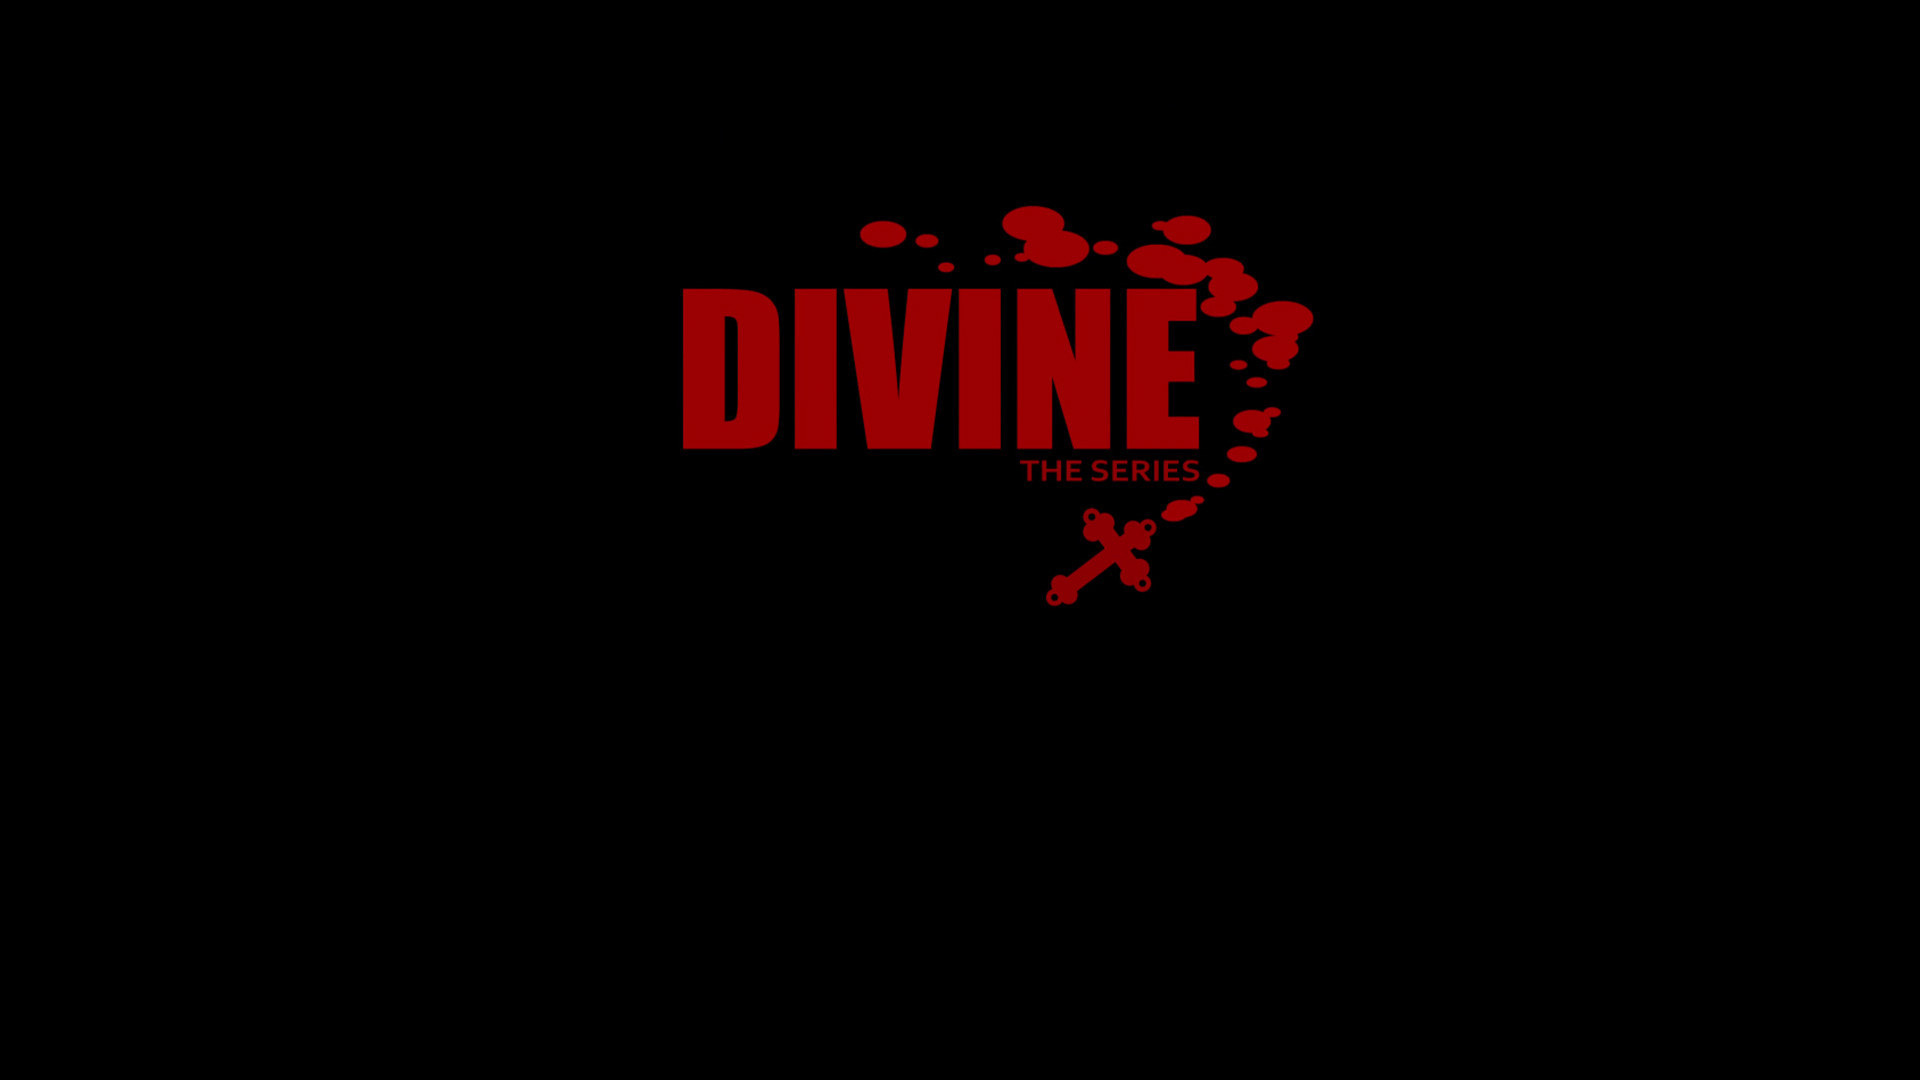 Show Divine: The Series